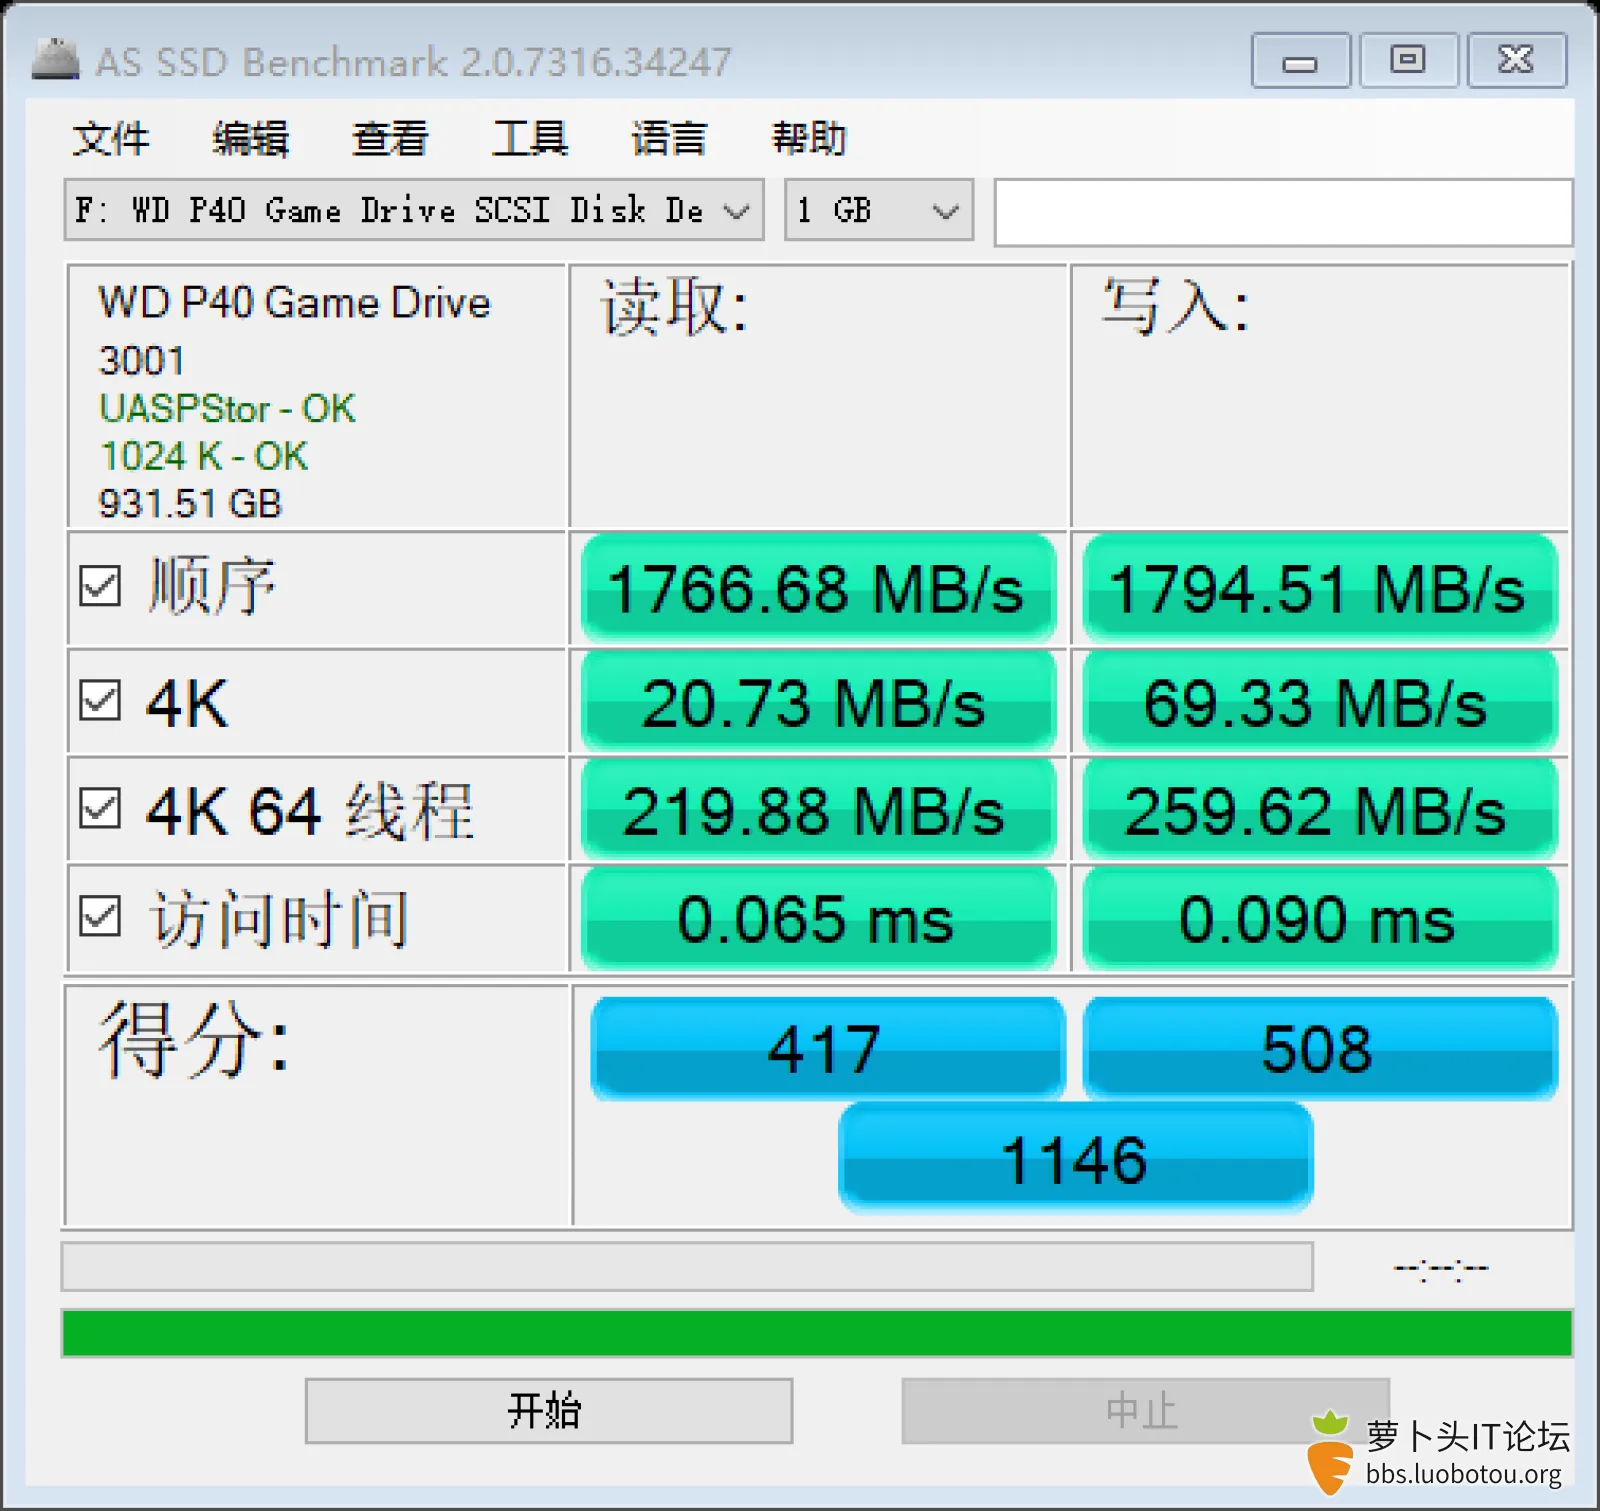 as-ssd-bench WD P40 Game Driv 2022.12.8 14-26-27.png